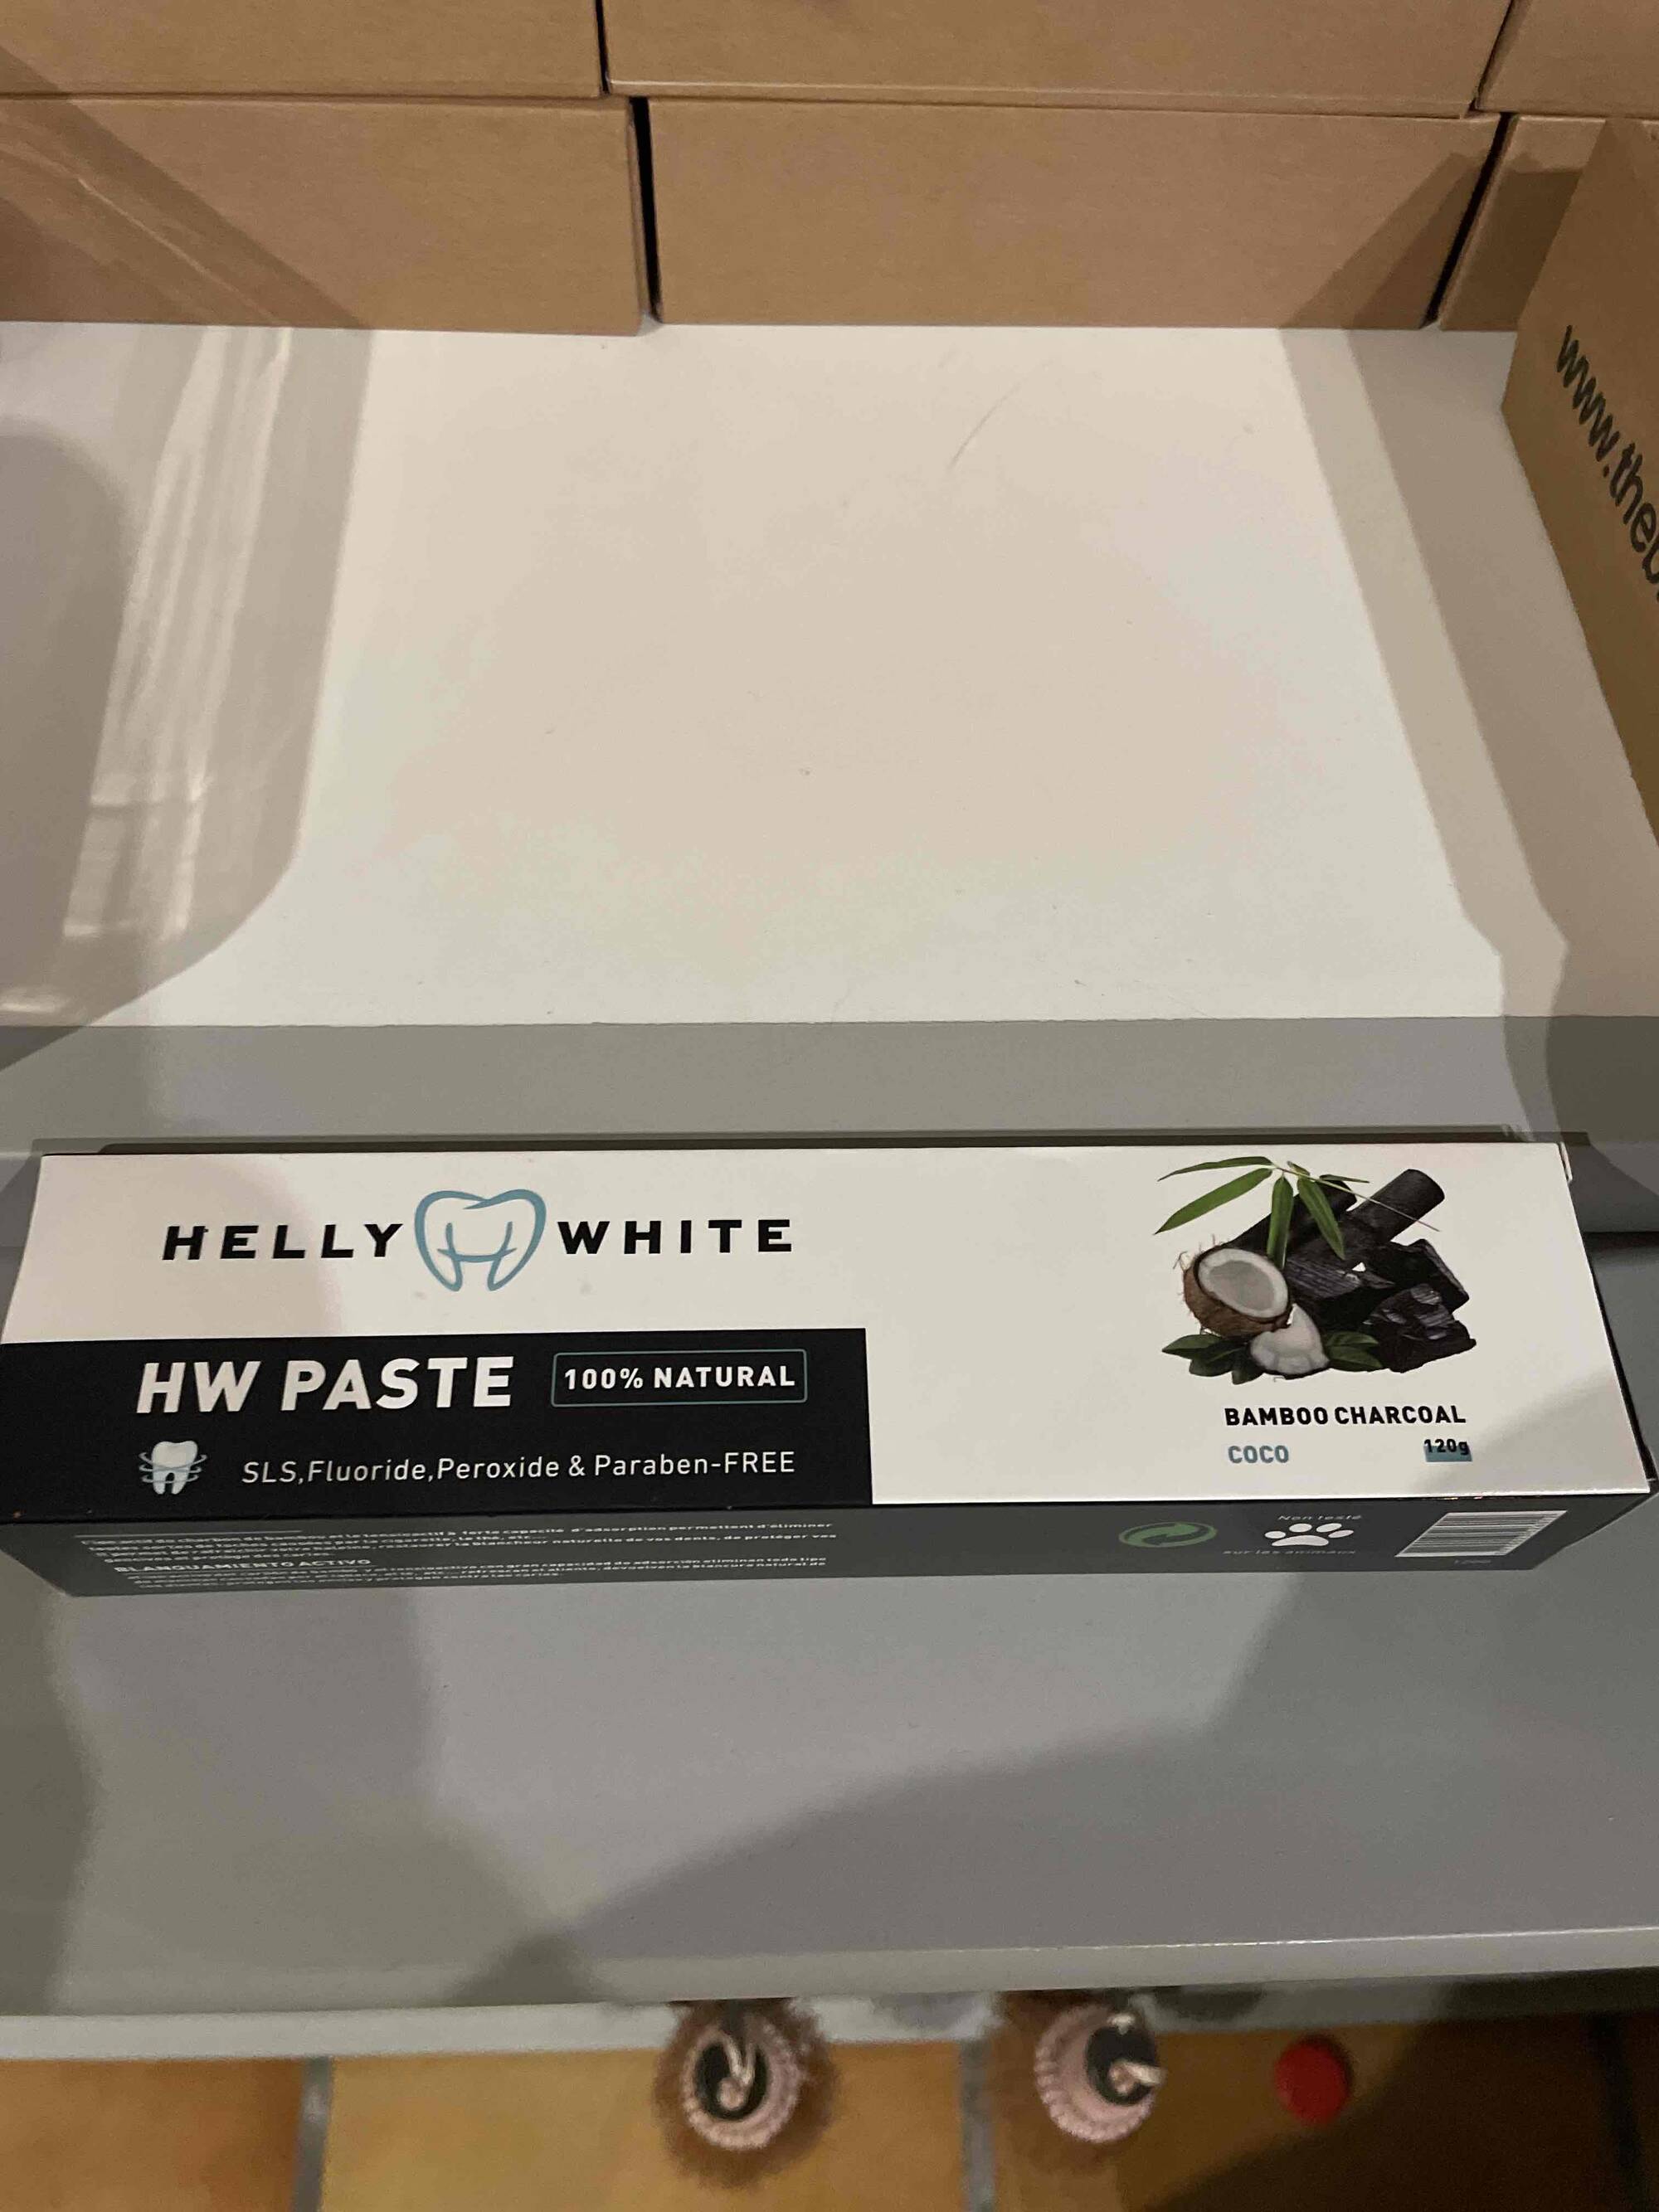 HELLY WHITE - HW paste bamboo charcoal coco